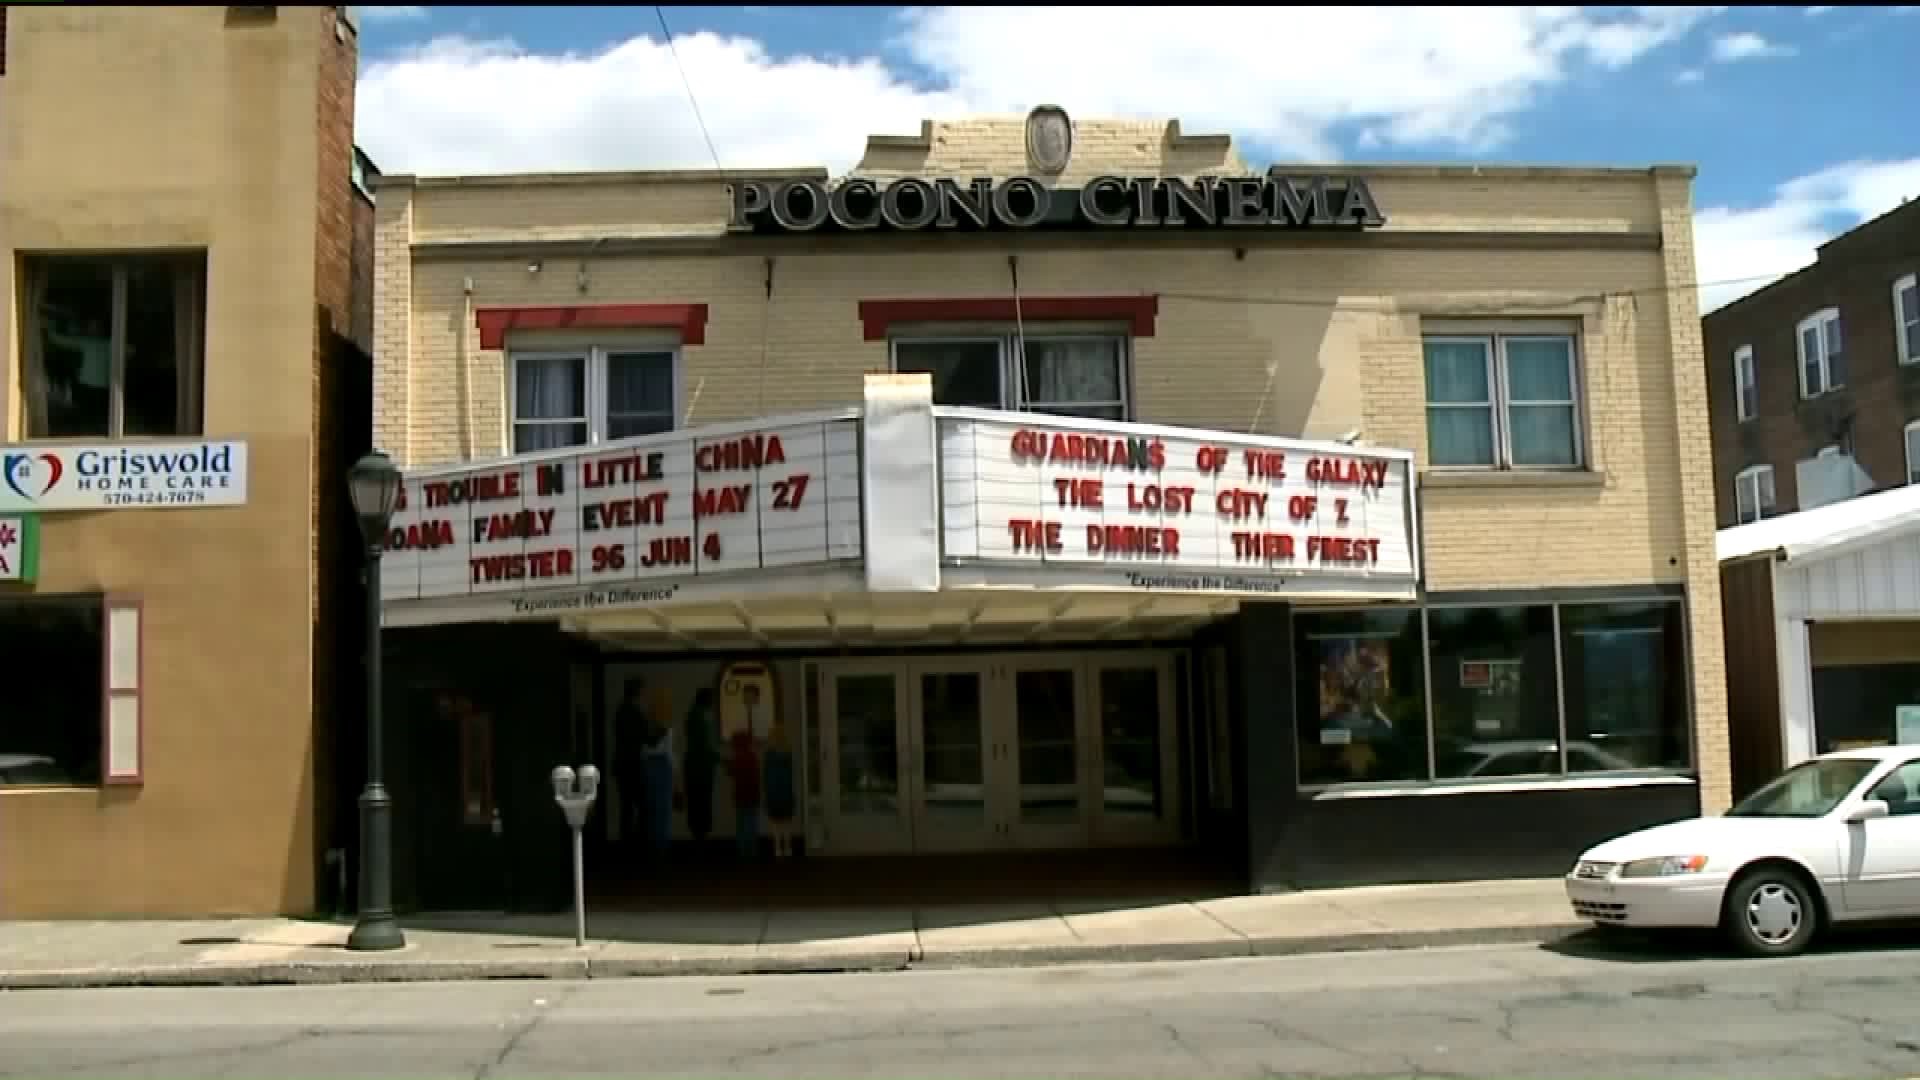 Vandals Hit Pocono Cinema in East Stroudsburg for the Second Time